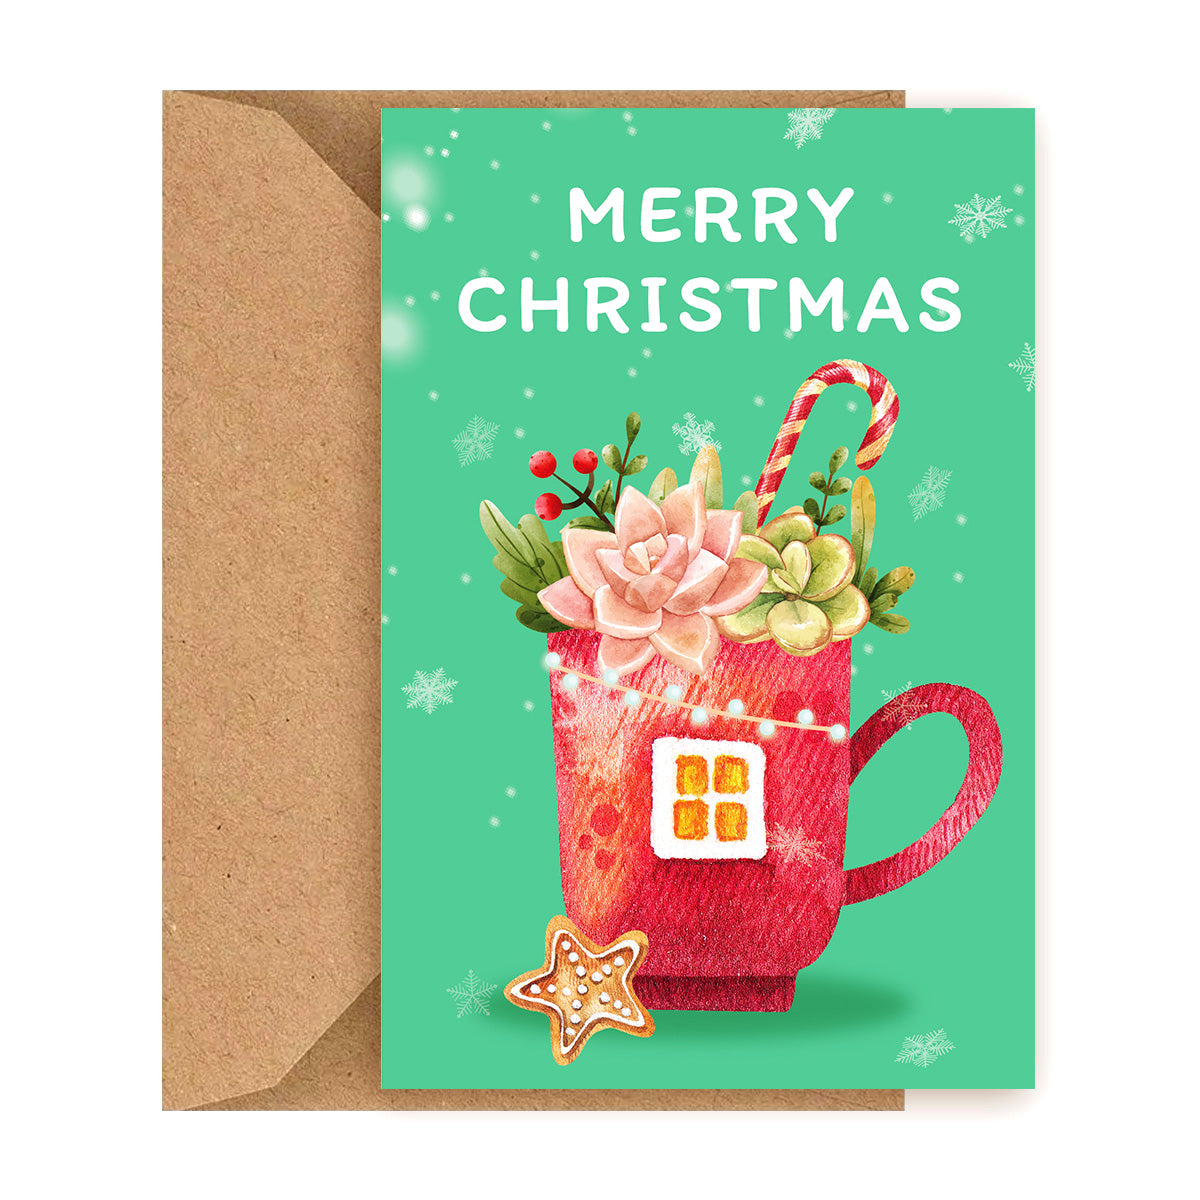 Merry Christmas card, Greeting card, Cards for Christmas, Christmas season gift ideas, Succulent Card, Succulent Christmas Card